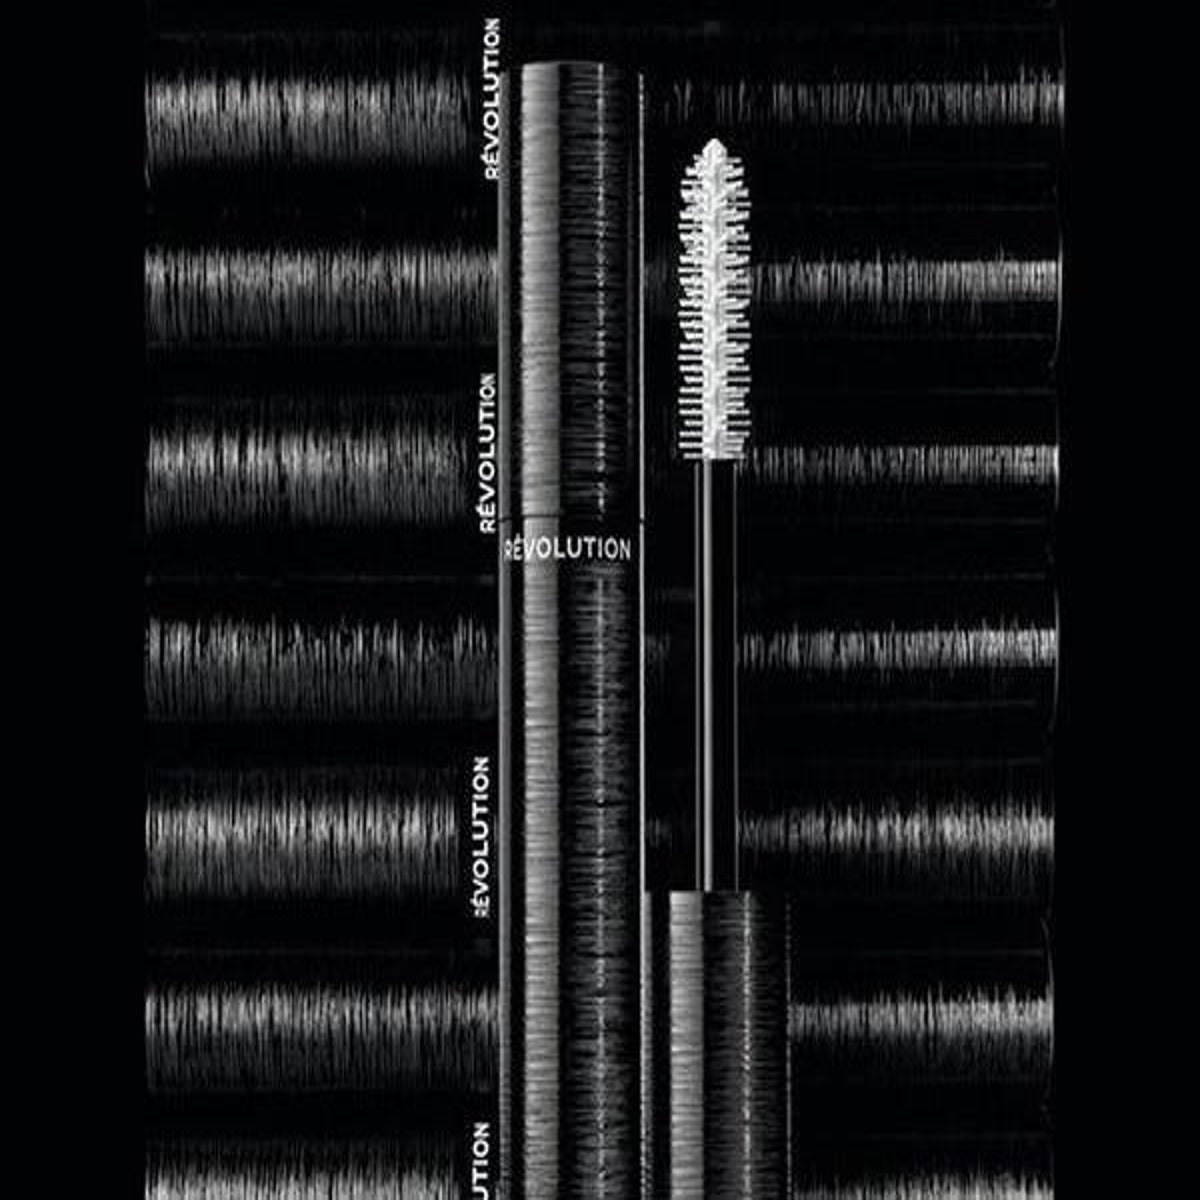 Chanel launches first ever mascara with 3D printed wand, The Independent